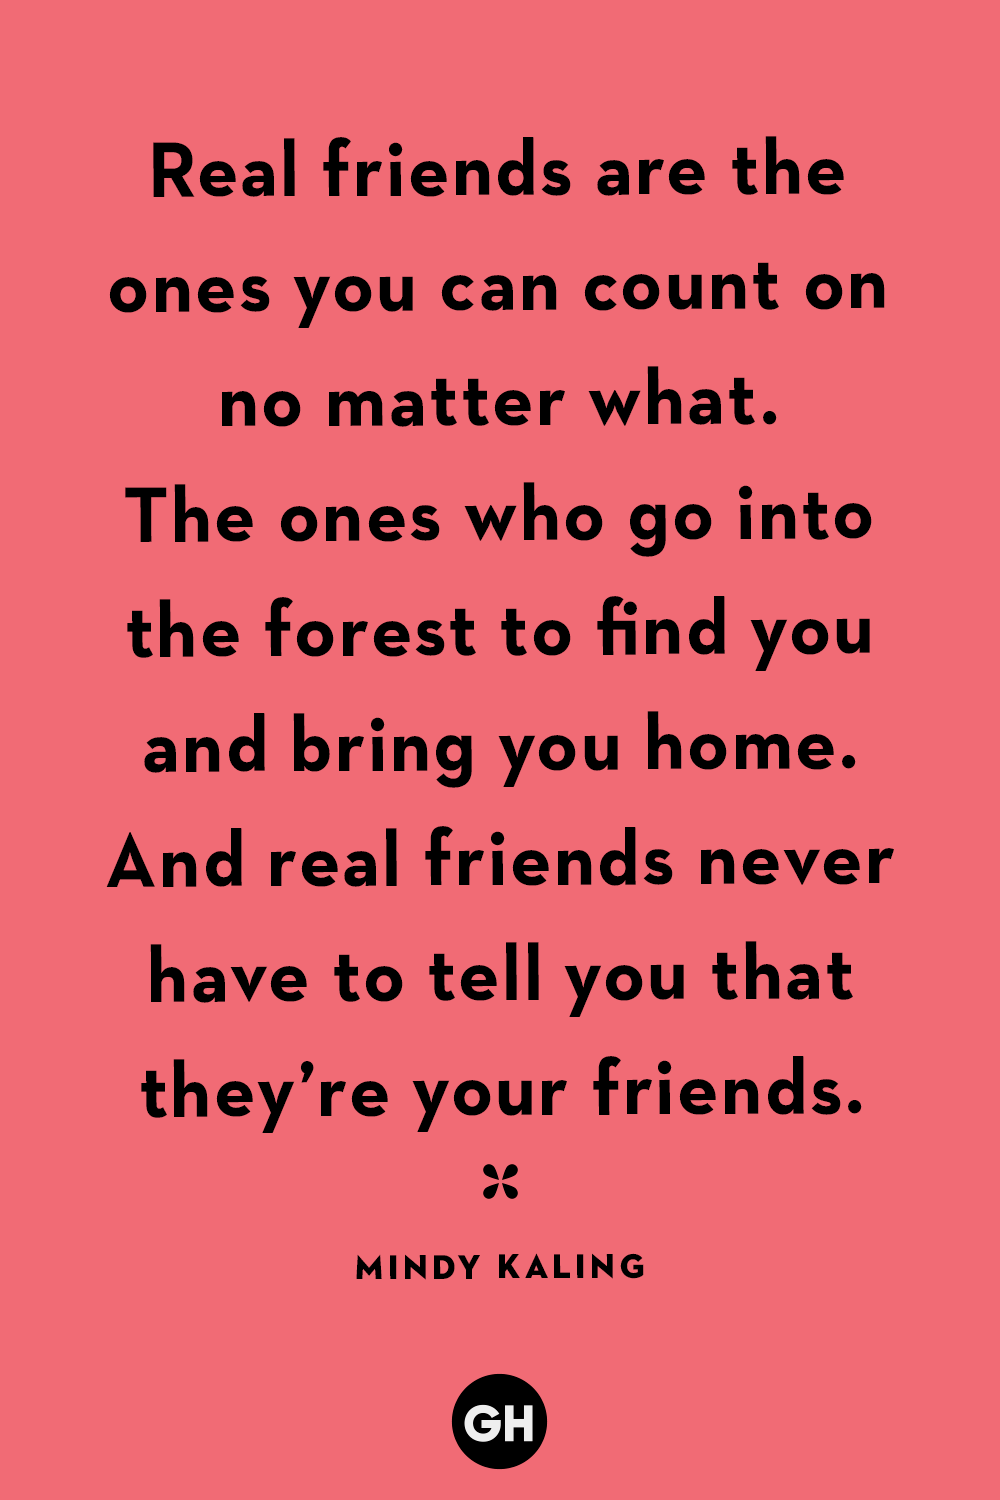 friends forever quotes for facebook cover photos